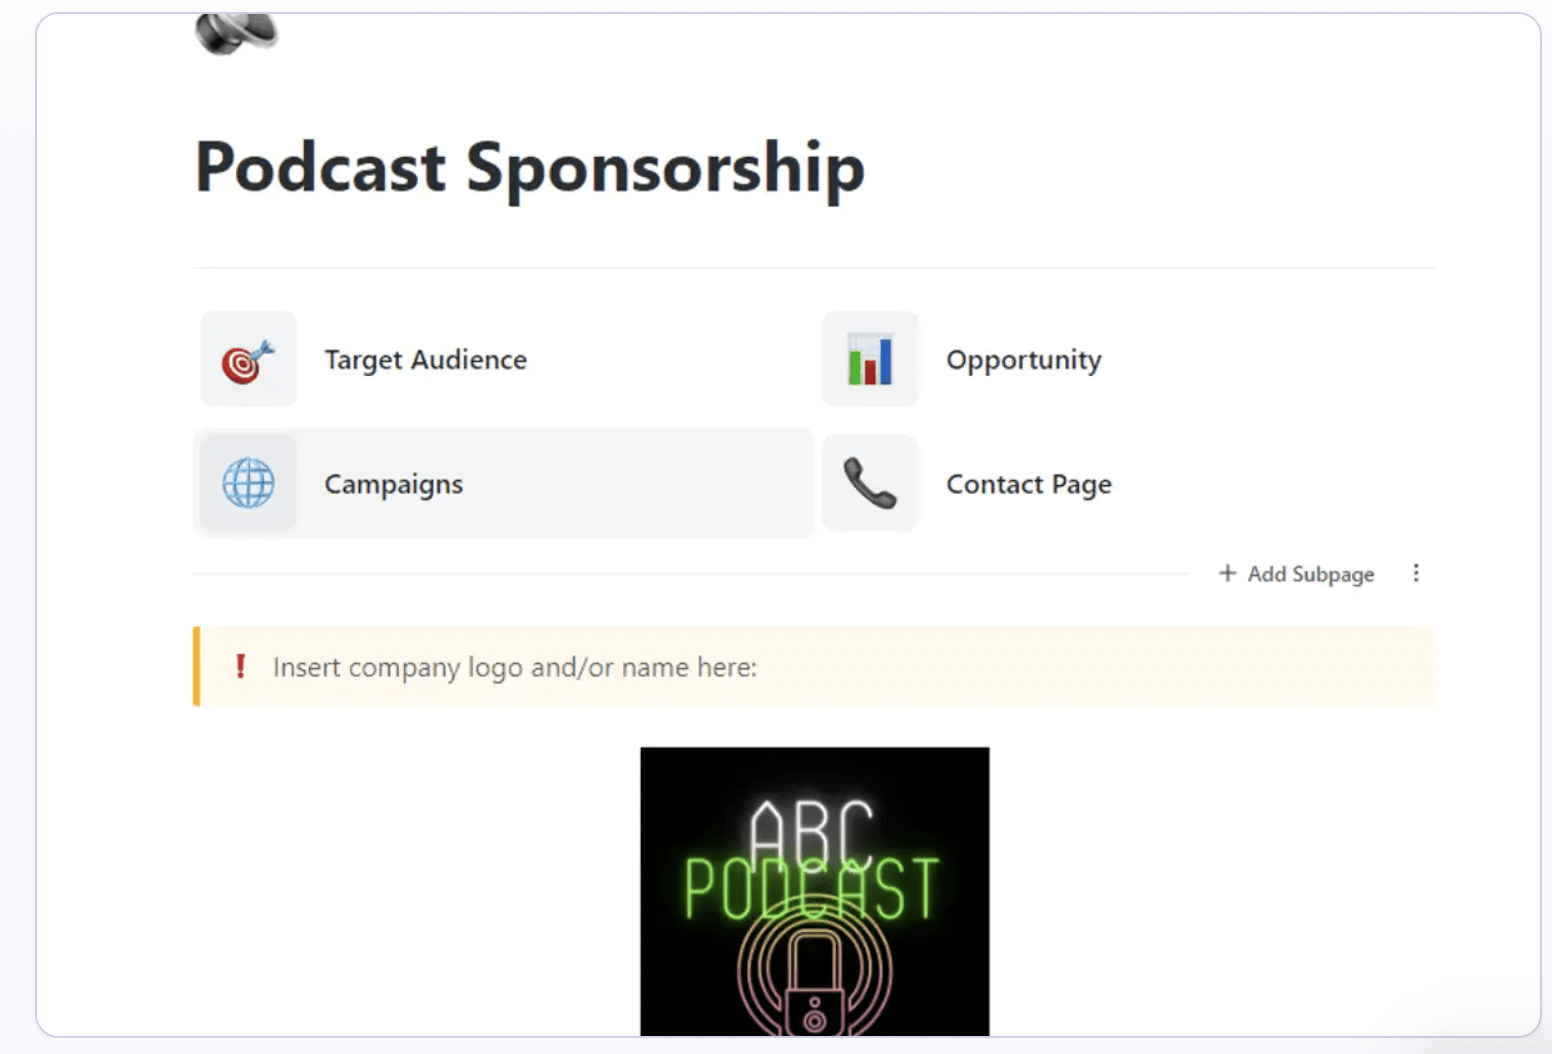 Get more sponsors for your podcast through the ClickUp Podcast Sponsorship Template